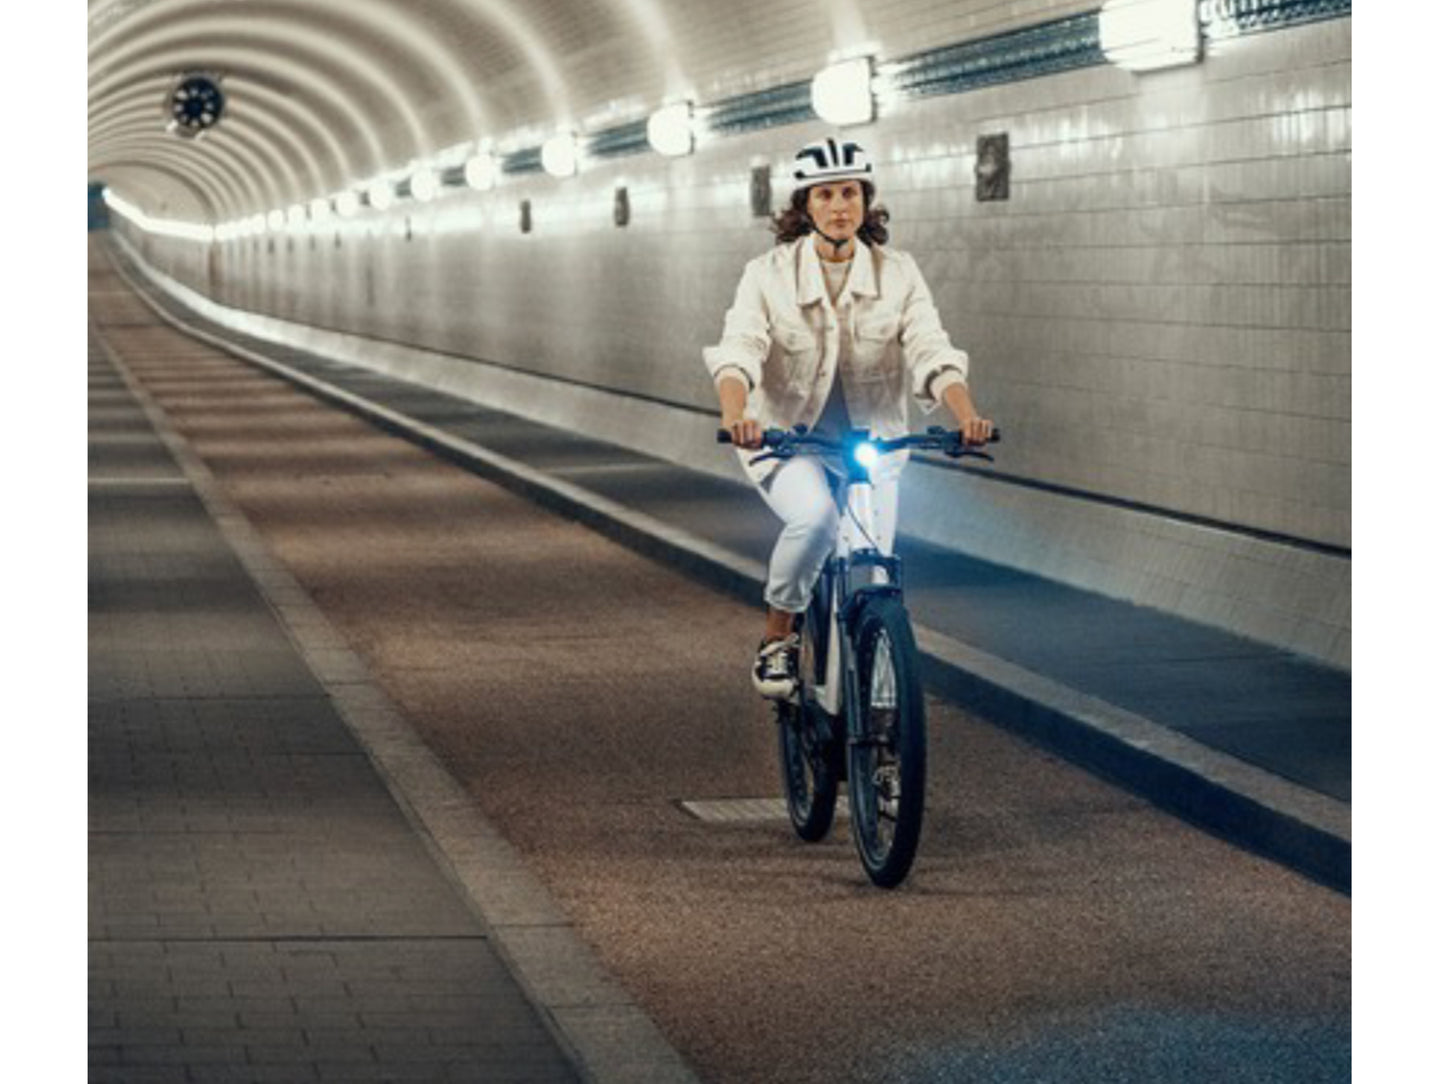 Riese and Muller Nevo GT Touring emtb hardtail woman riding on city tunnel bike path headlight on